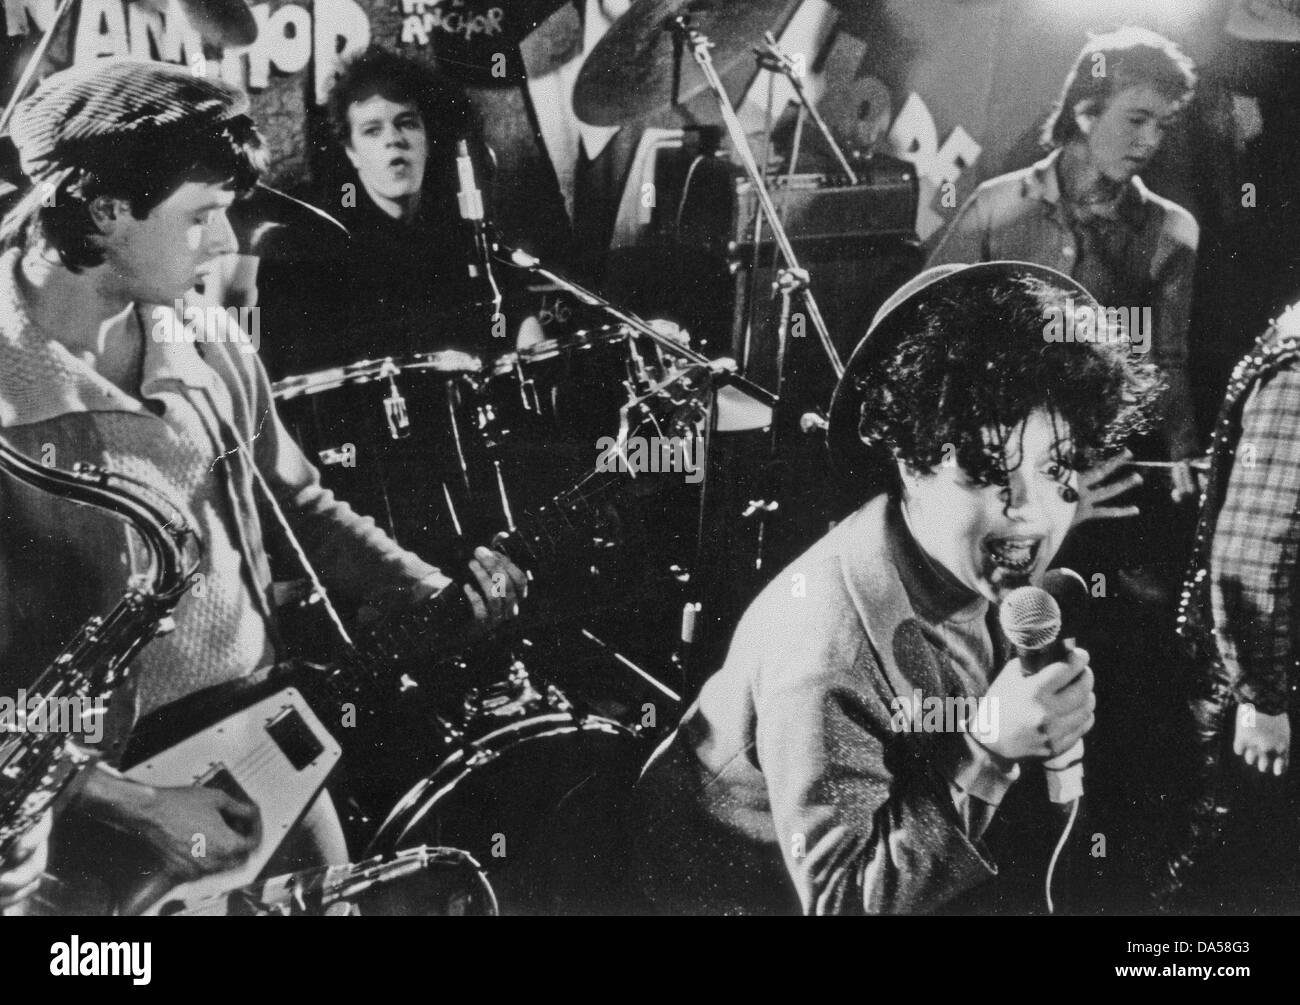 X-RAY SPEX Promotional photo of English punk group about 1978 with Poly Styrene on vocals Stock Photo